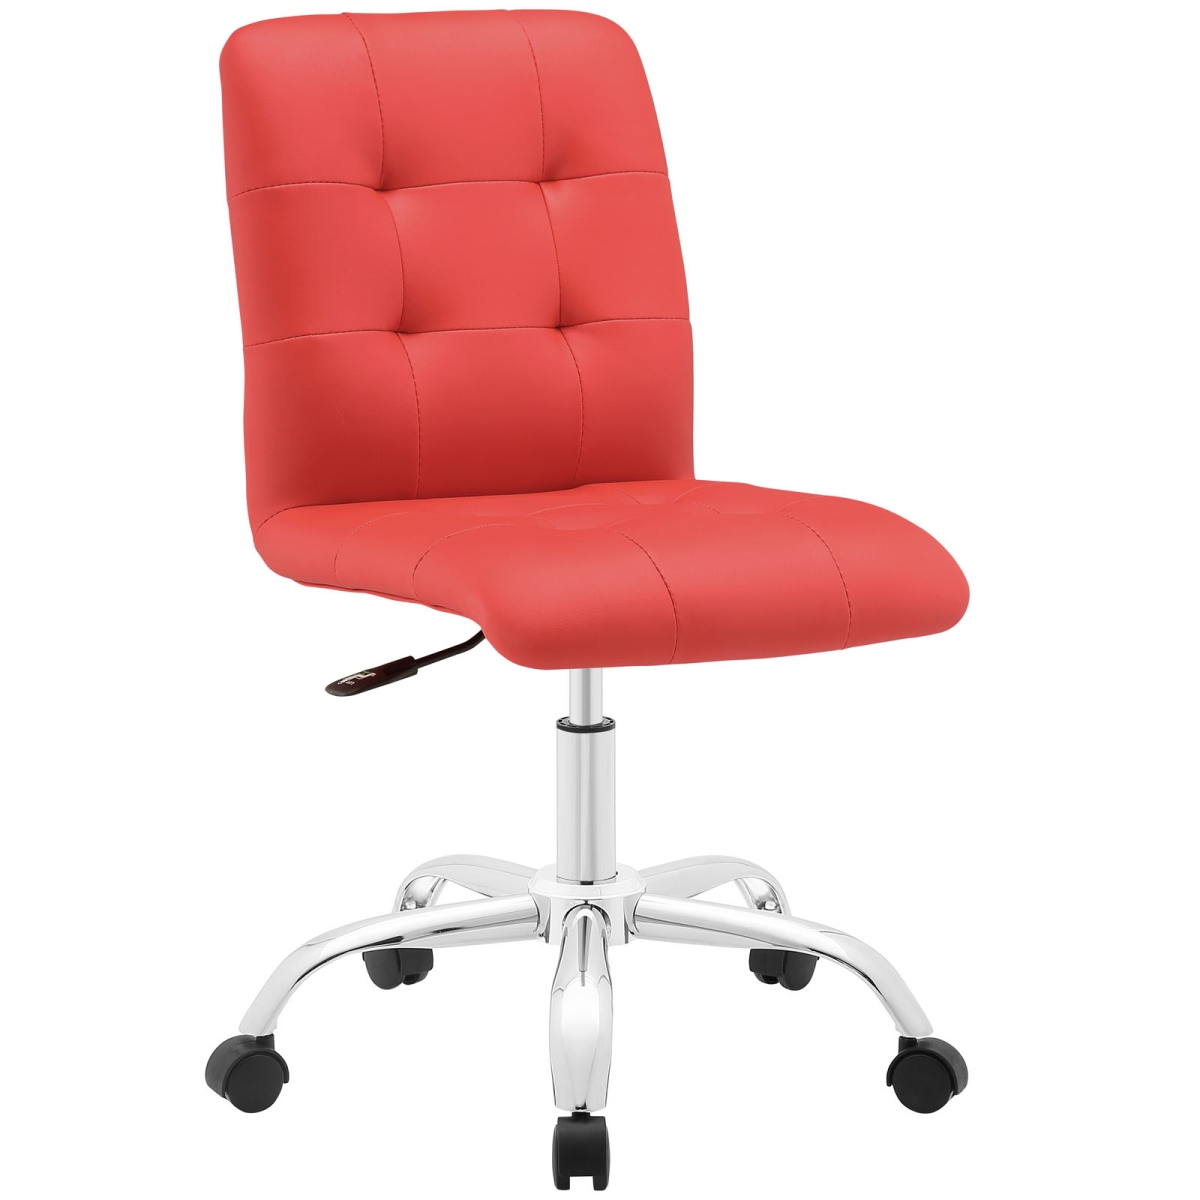 Modway Eei-1533-red Prim Armless Mid Back Office Chair, Red